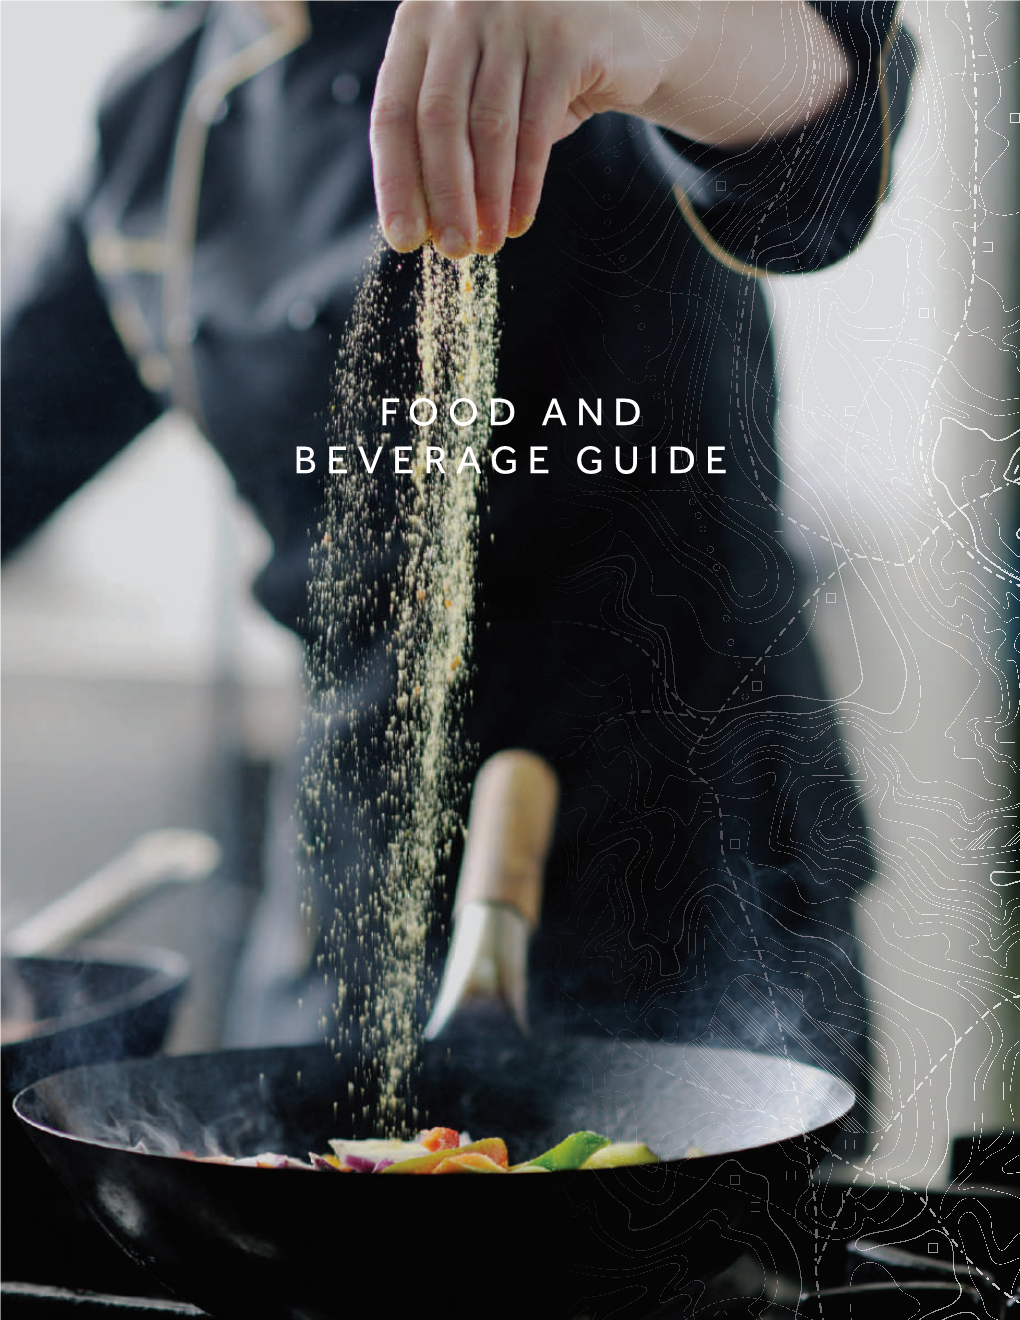 Food and Beverage Guide B:11.25" T:11"